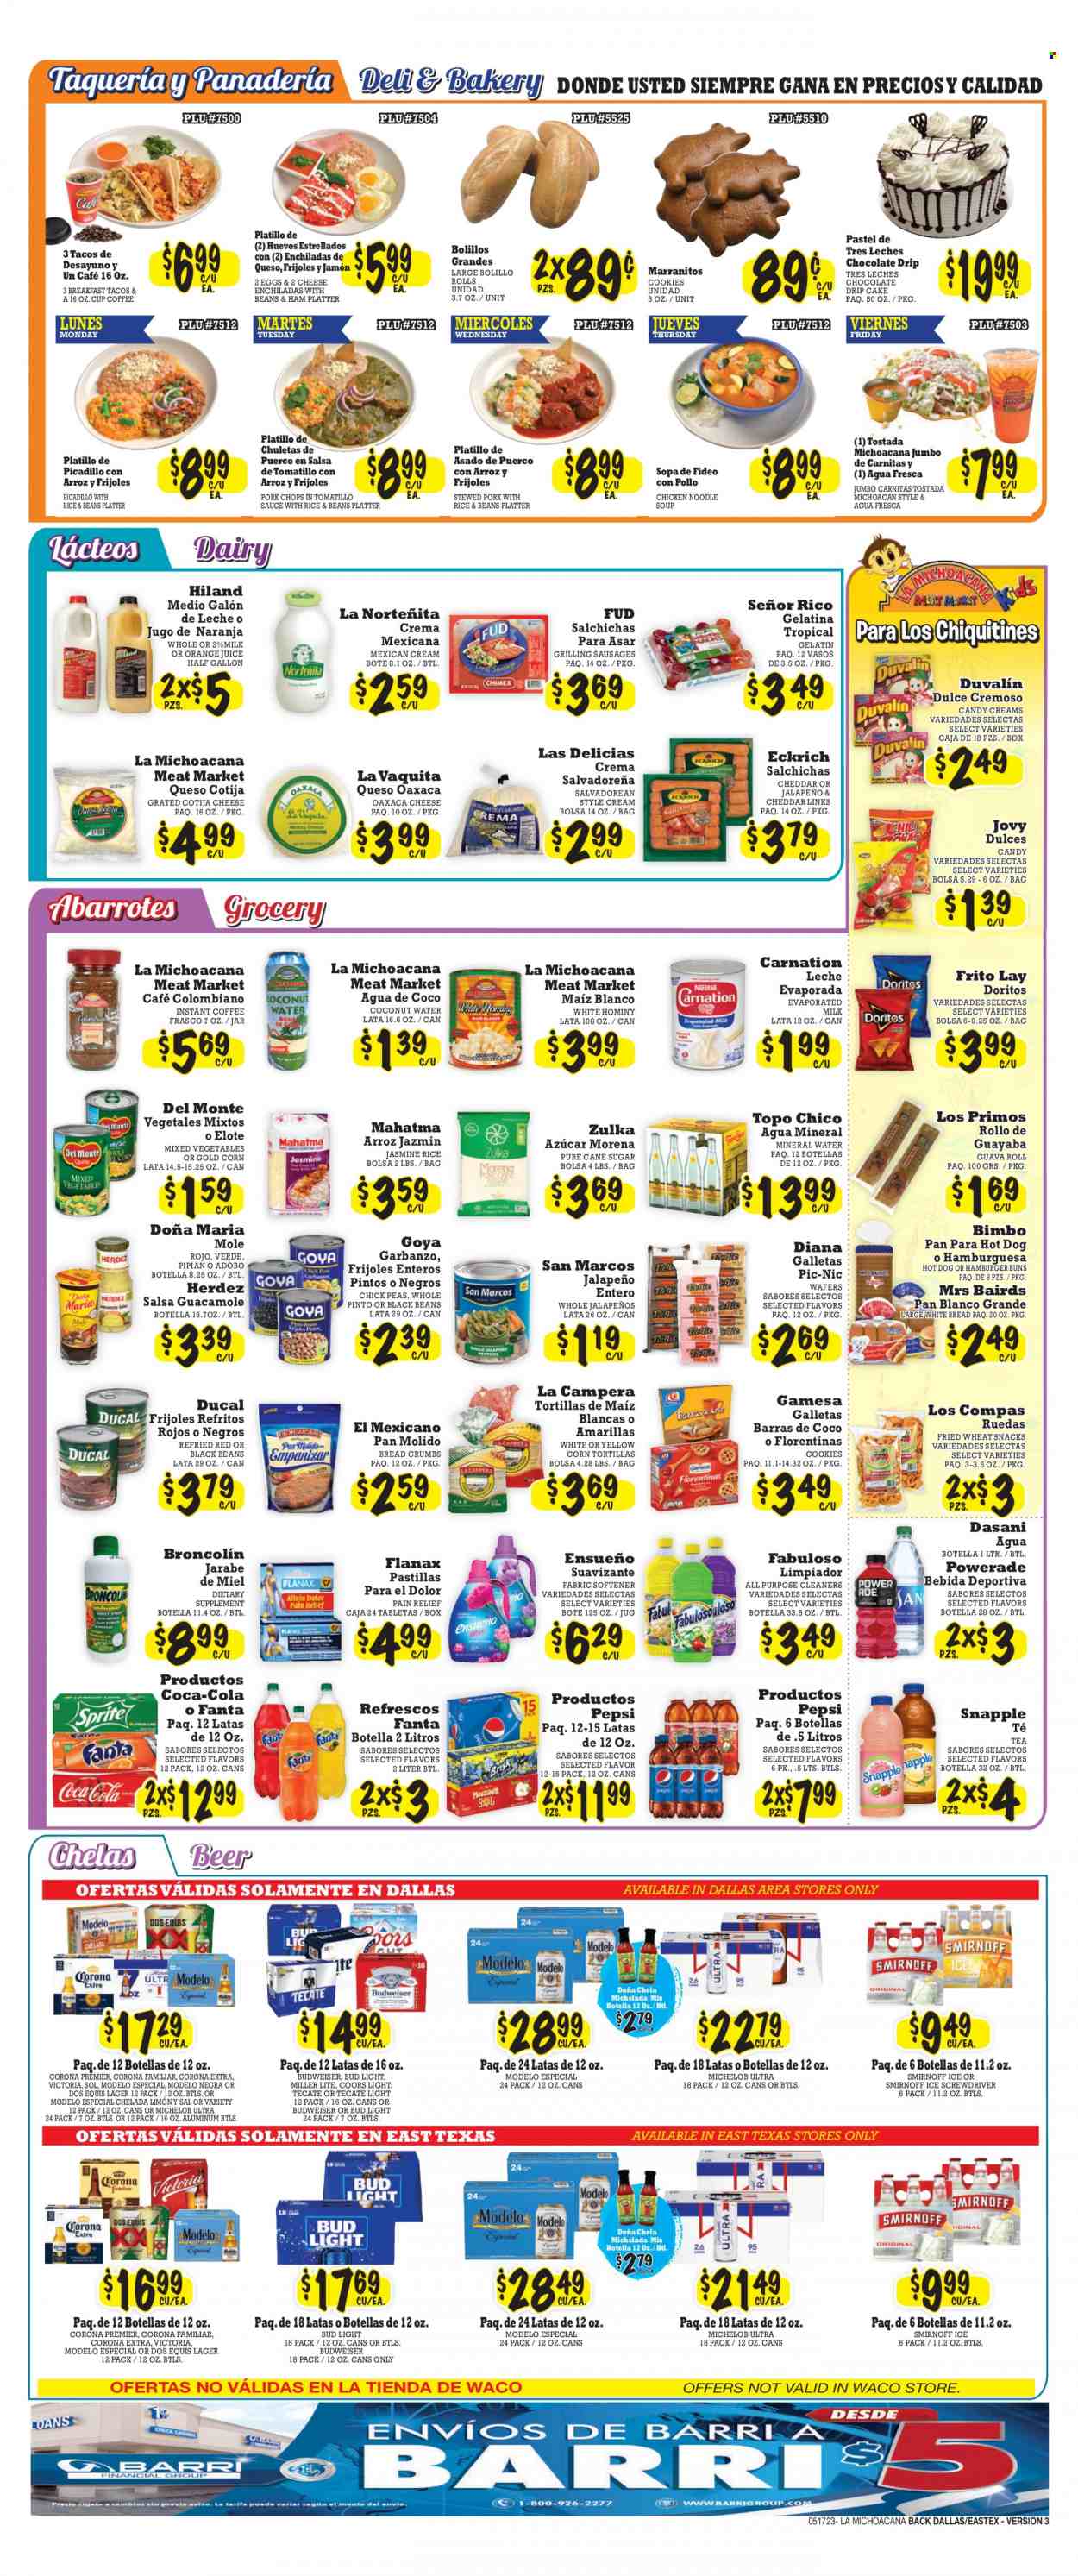 thumbnail - La Michoacana Meat Market Flyer - 05/17/2023 - 05/30/2023 - Sales products - corn tortillas, tortillas, white bread, cake, buns, burger buns, tacos, breadcrumbs, tomatillo, enchiladas, hot dog, soup, sauce, noodles cup, ham, sausage, guacamole, cheese, evaporated milk, eggs, mixed vegetables, cookies, wafers, chocolate, snack, Candy, Doritos, salty snack, cane sugar, sugar, black beans, Goya, Del Monte, jasmine rice, adobo sauce, salsa, Coca-Cola, Powerade, Pepsi, orange juice, juice, Fanta, energy drink, coconut water, soft drink, Snapple, mineral water, water, tea, coffee, instant coffee, alcohol, Smirnoff, beer, Bud Light, Corona Extra, Lager, Modelo, Topo Chico, pork chops, pork meat, Fabuloso, fabric softener, bag, pan, platters, Budweiser, Miller Lite, Coors, Dos Equis, Michelob. Page 2.